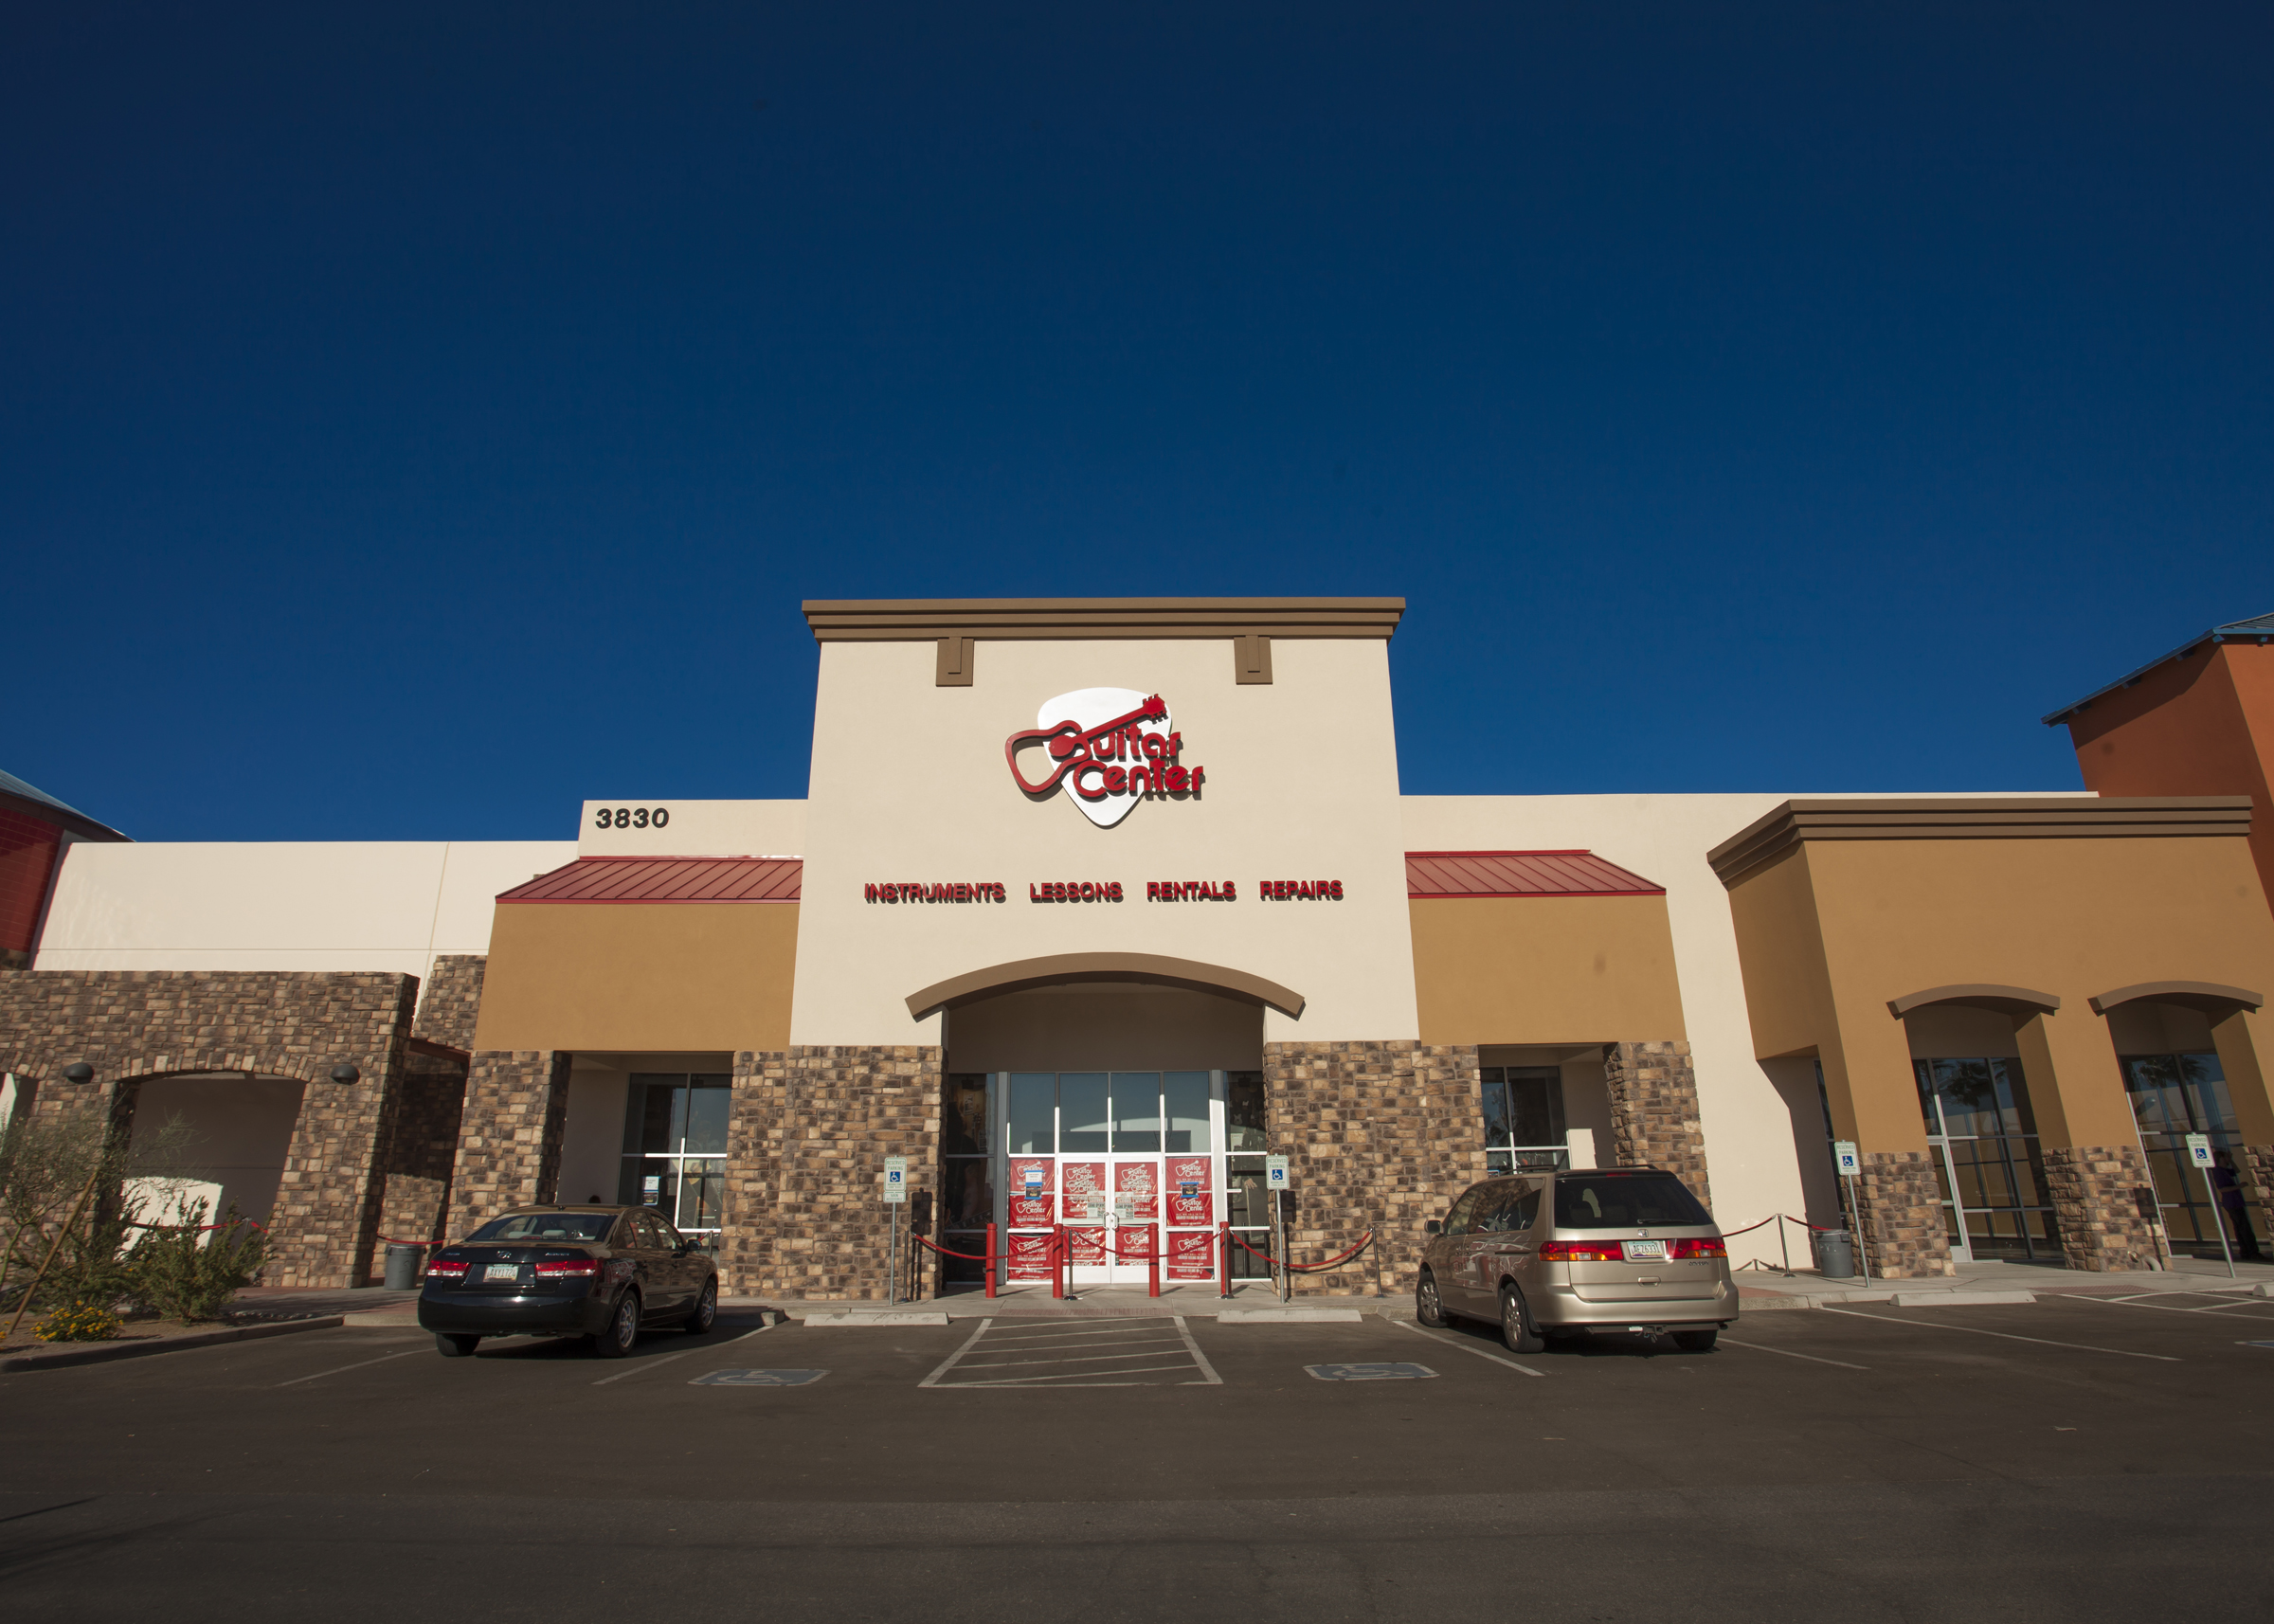 Guitar Center Opens New Store And Lessons Studio In NW Tuscon, AZ